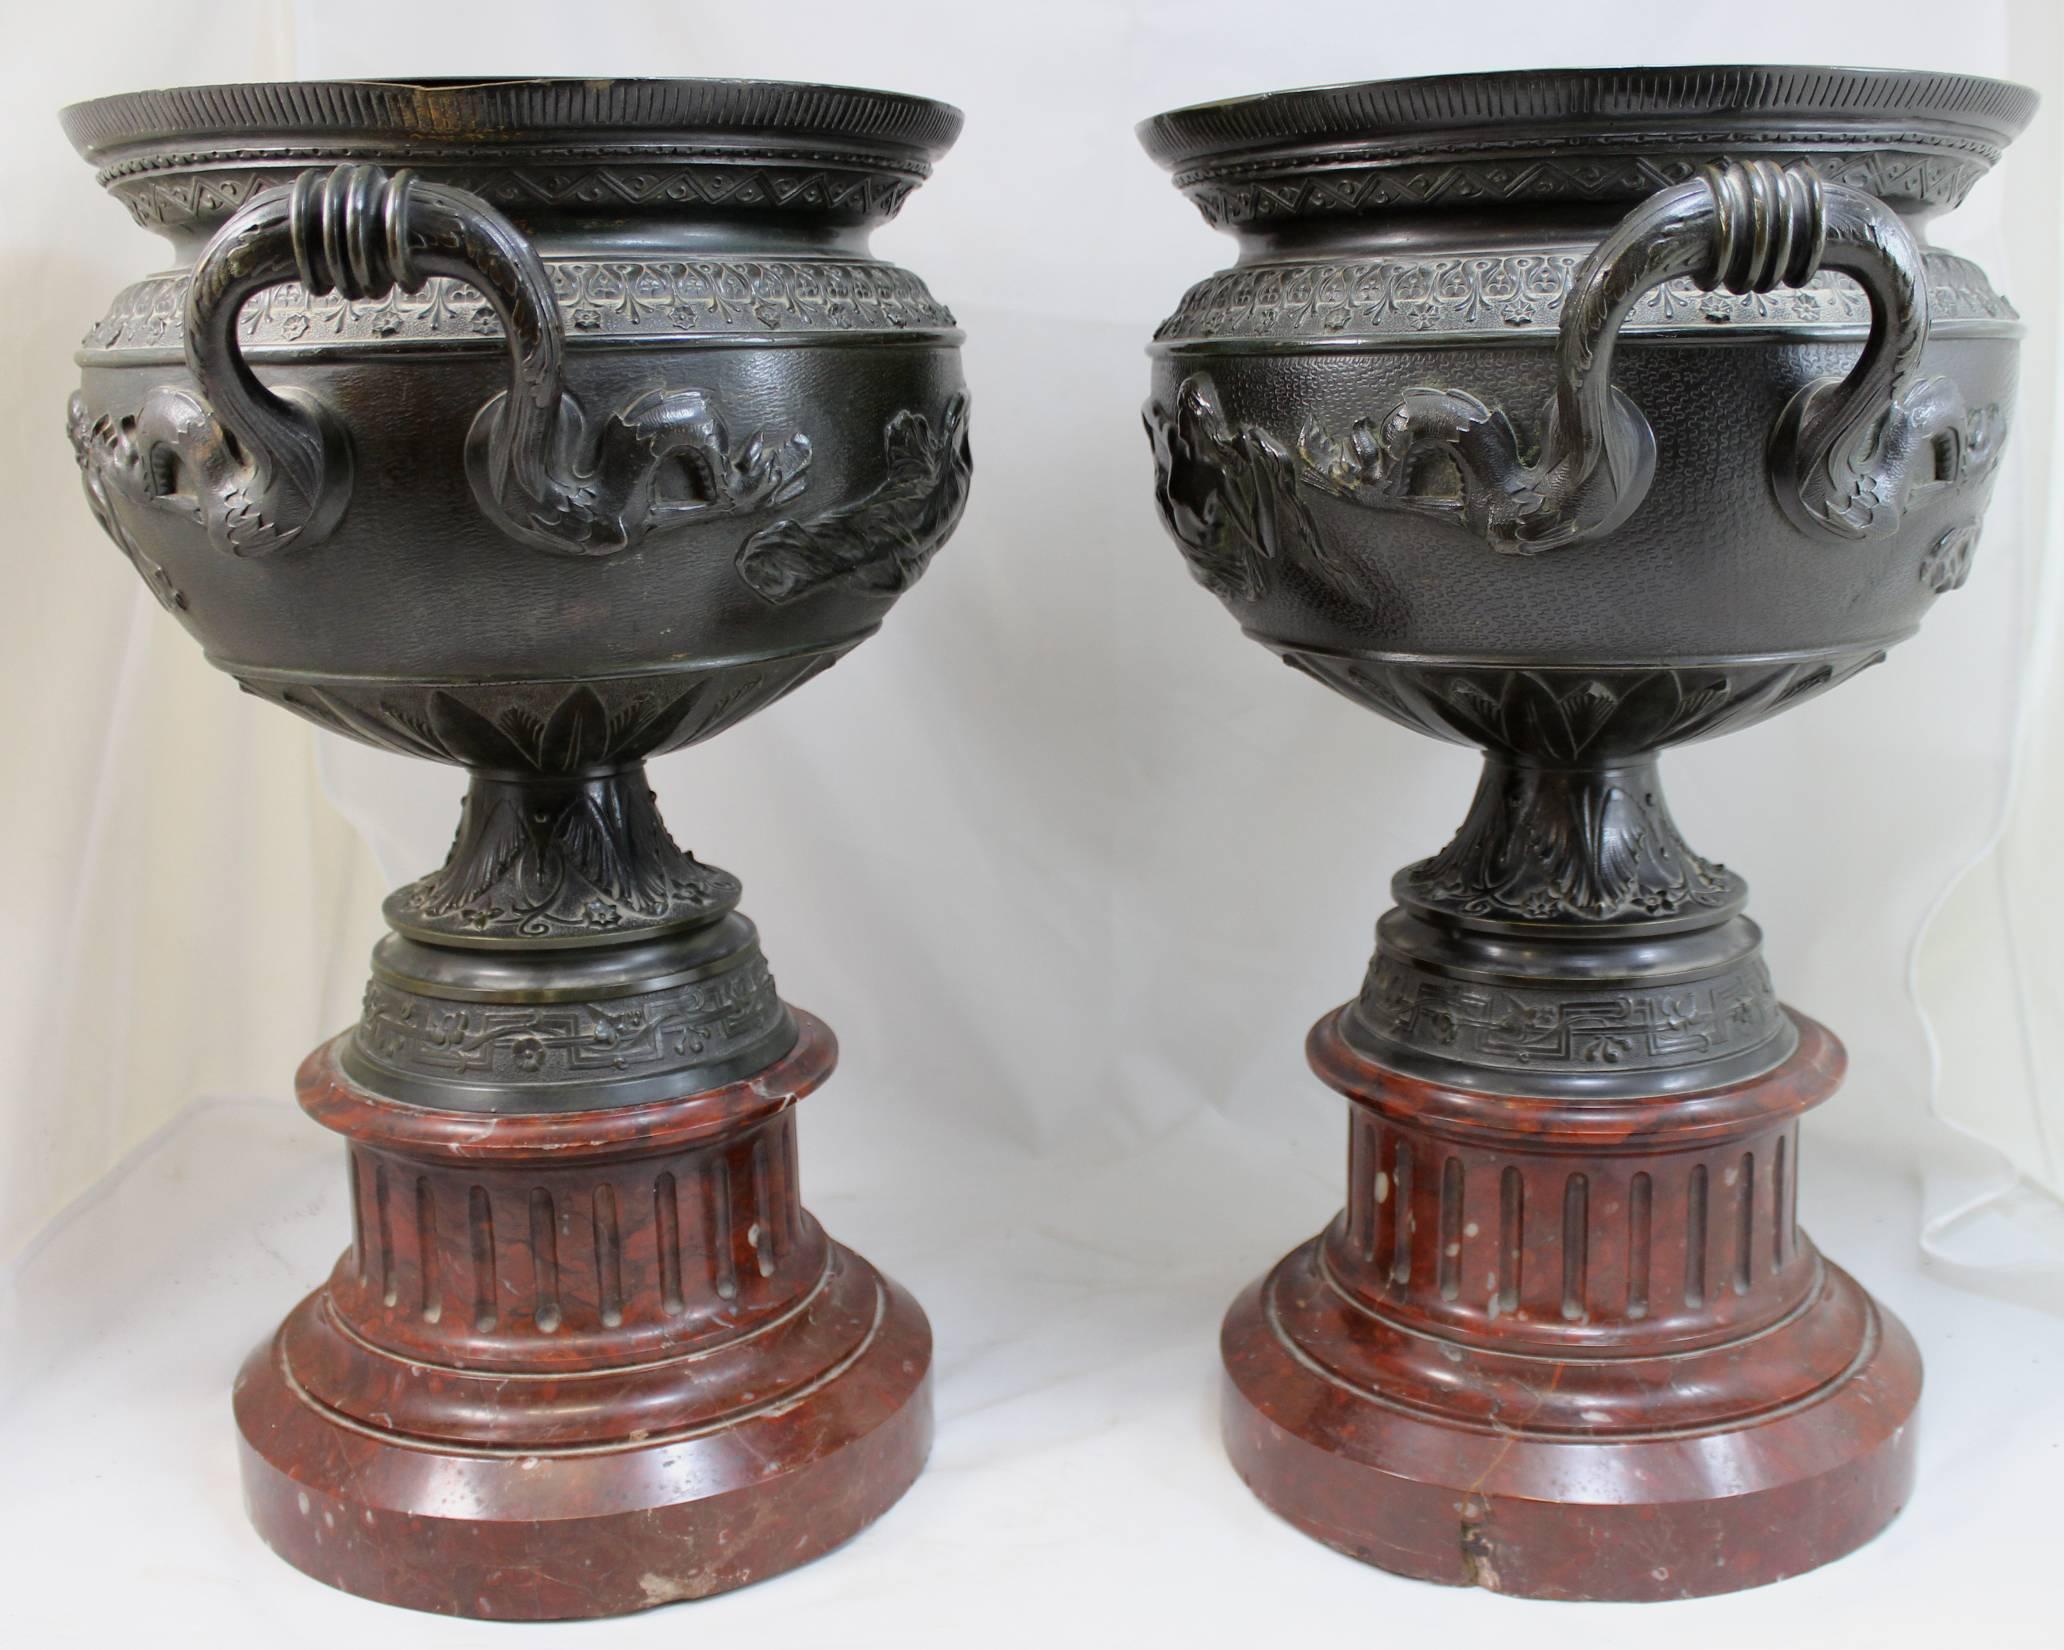 An exceptional pair of finely cast French bronze handled urns depicting Classical female figures, along with dragon or serpent decorated handles, with foliate and geometric designs, and mounted on Griotte Uni marble plinths, dating to second half of